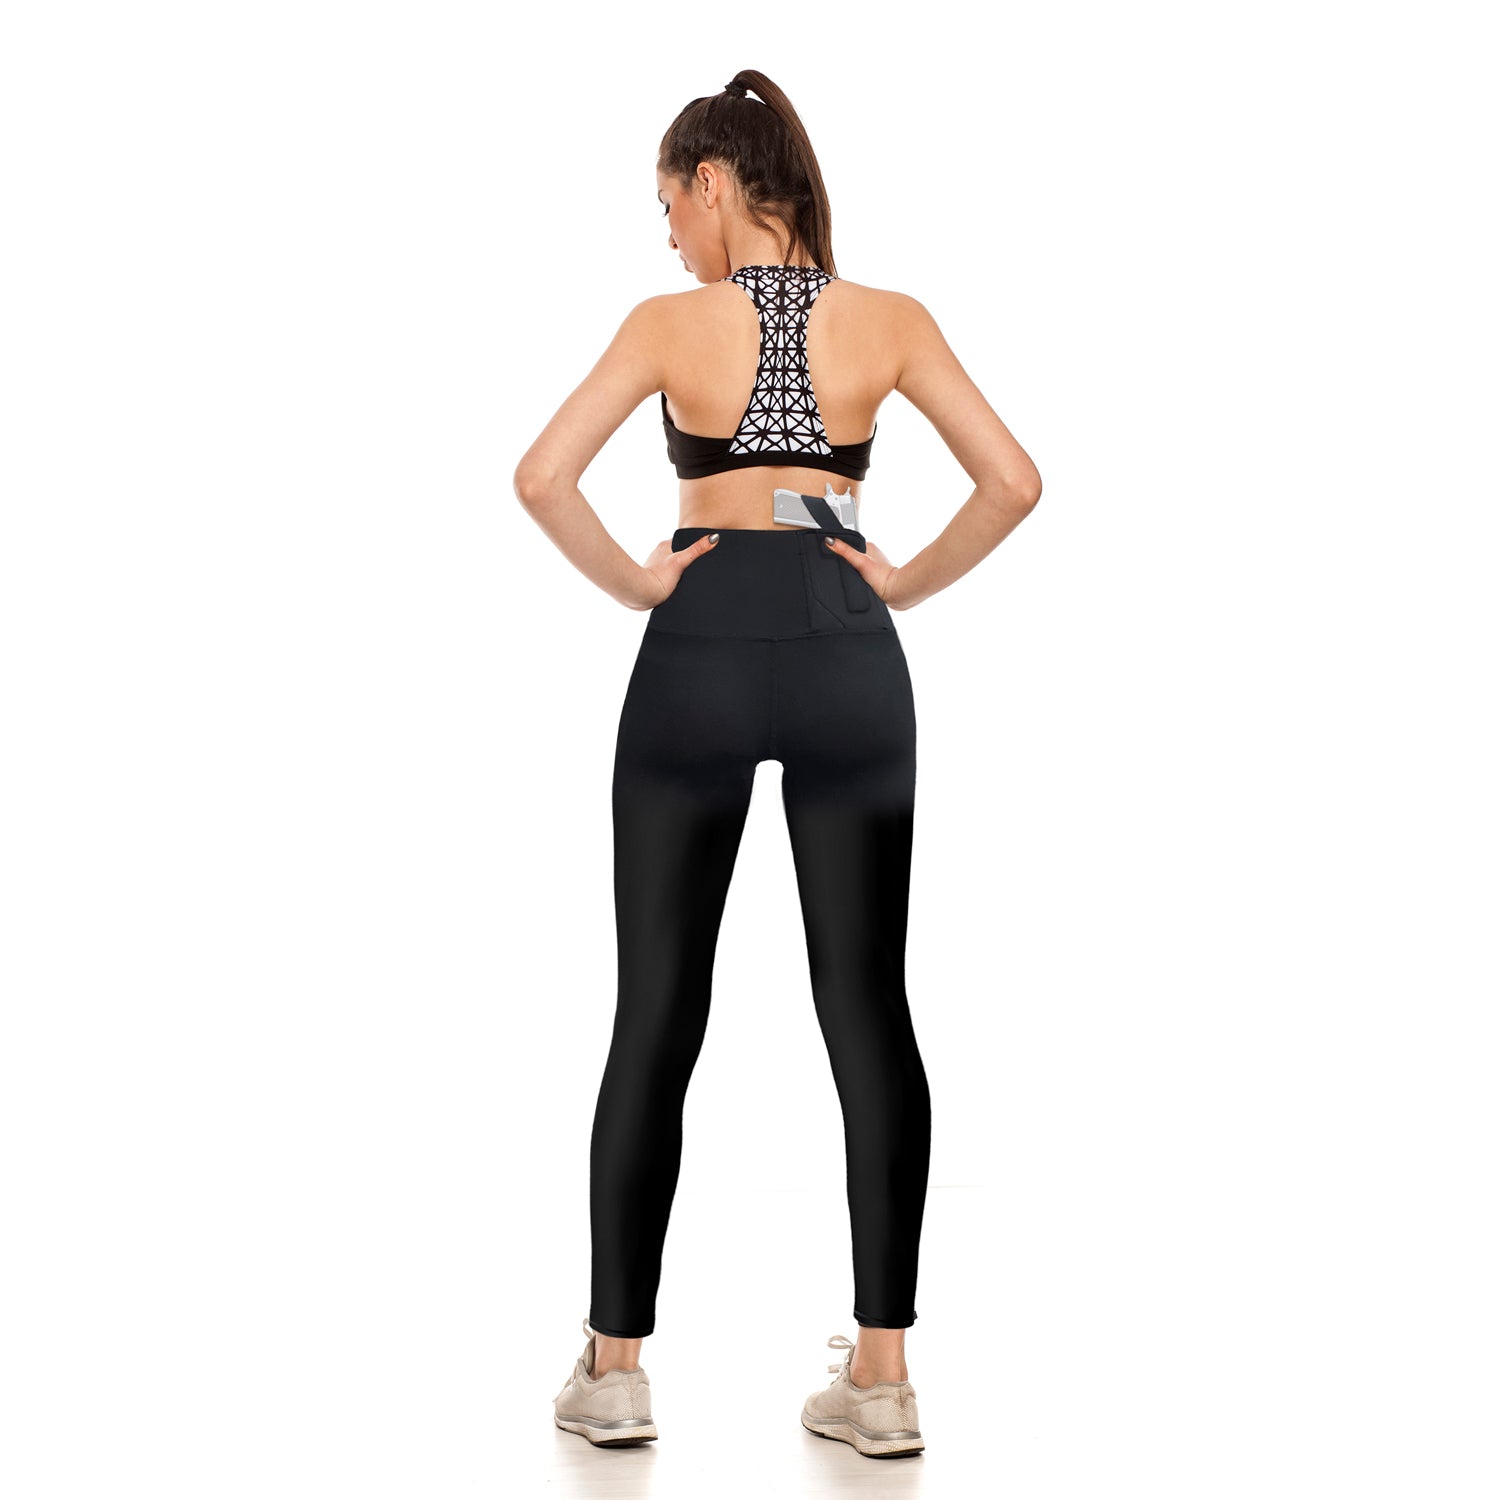 Combining the best of both worlds – yoga pants and concealed carry